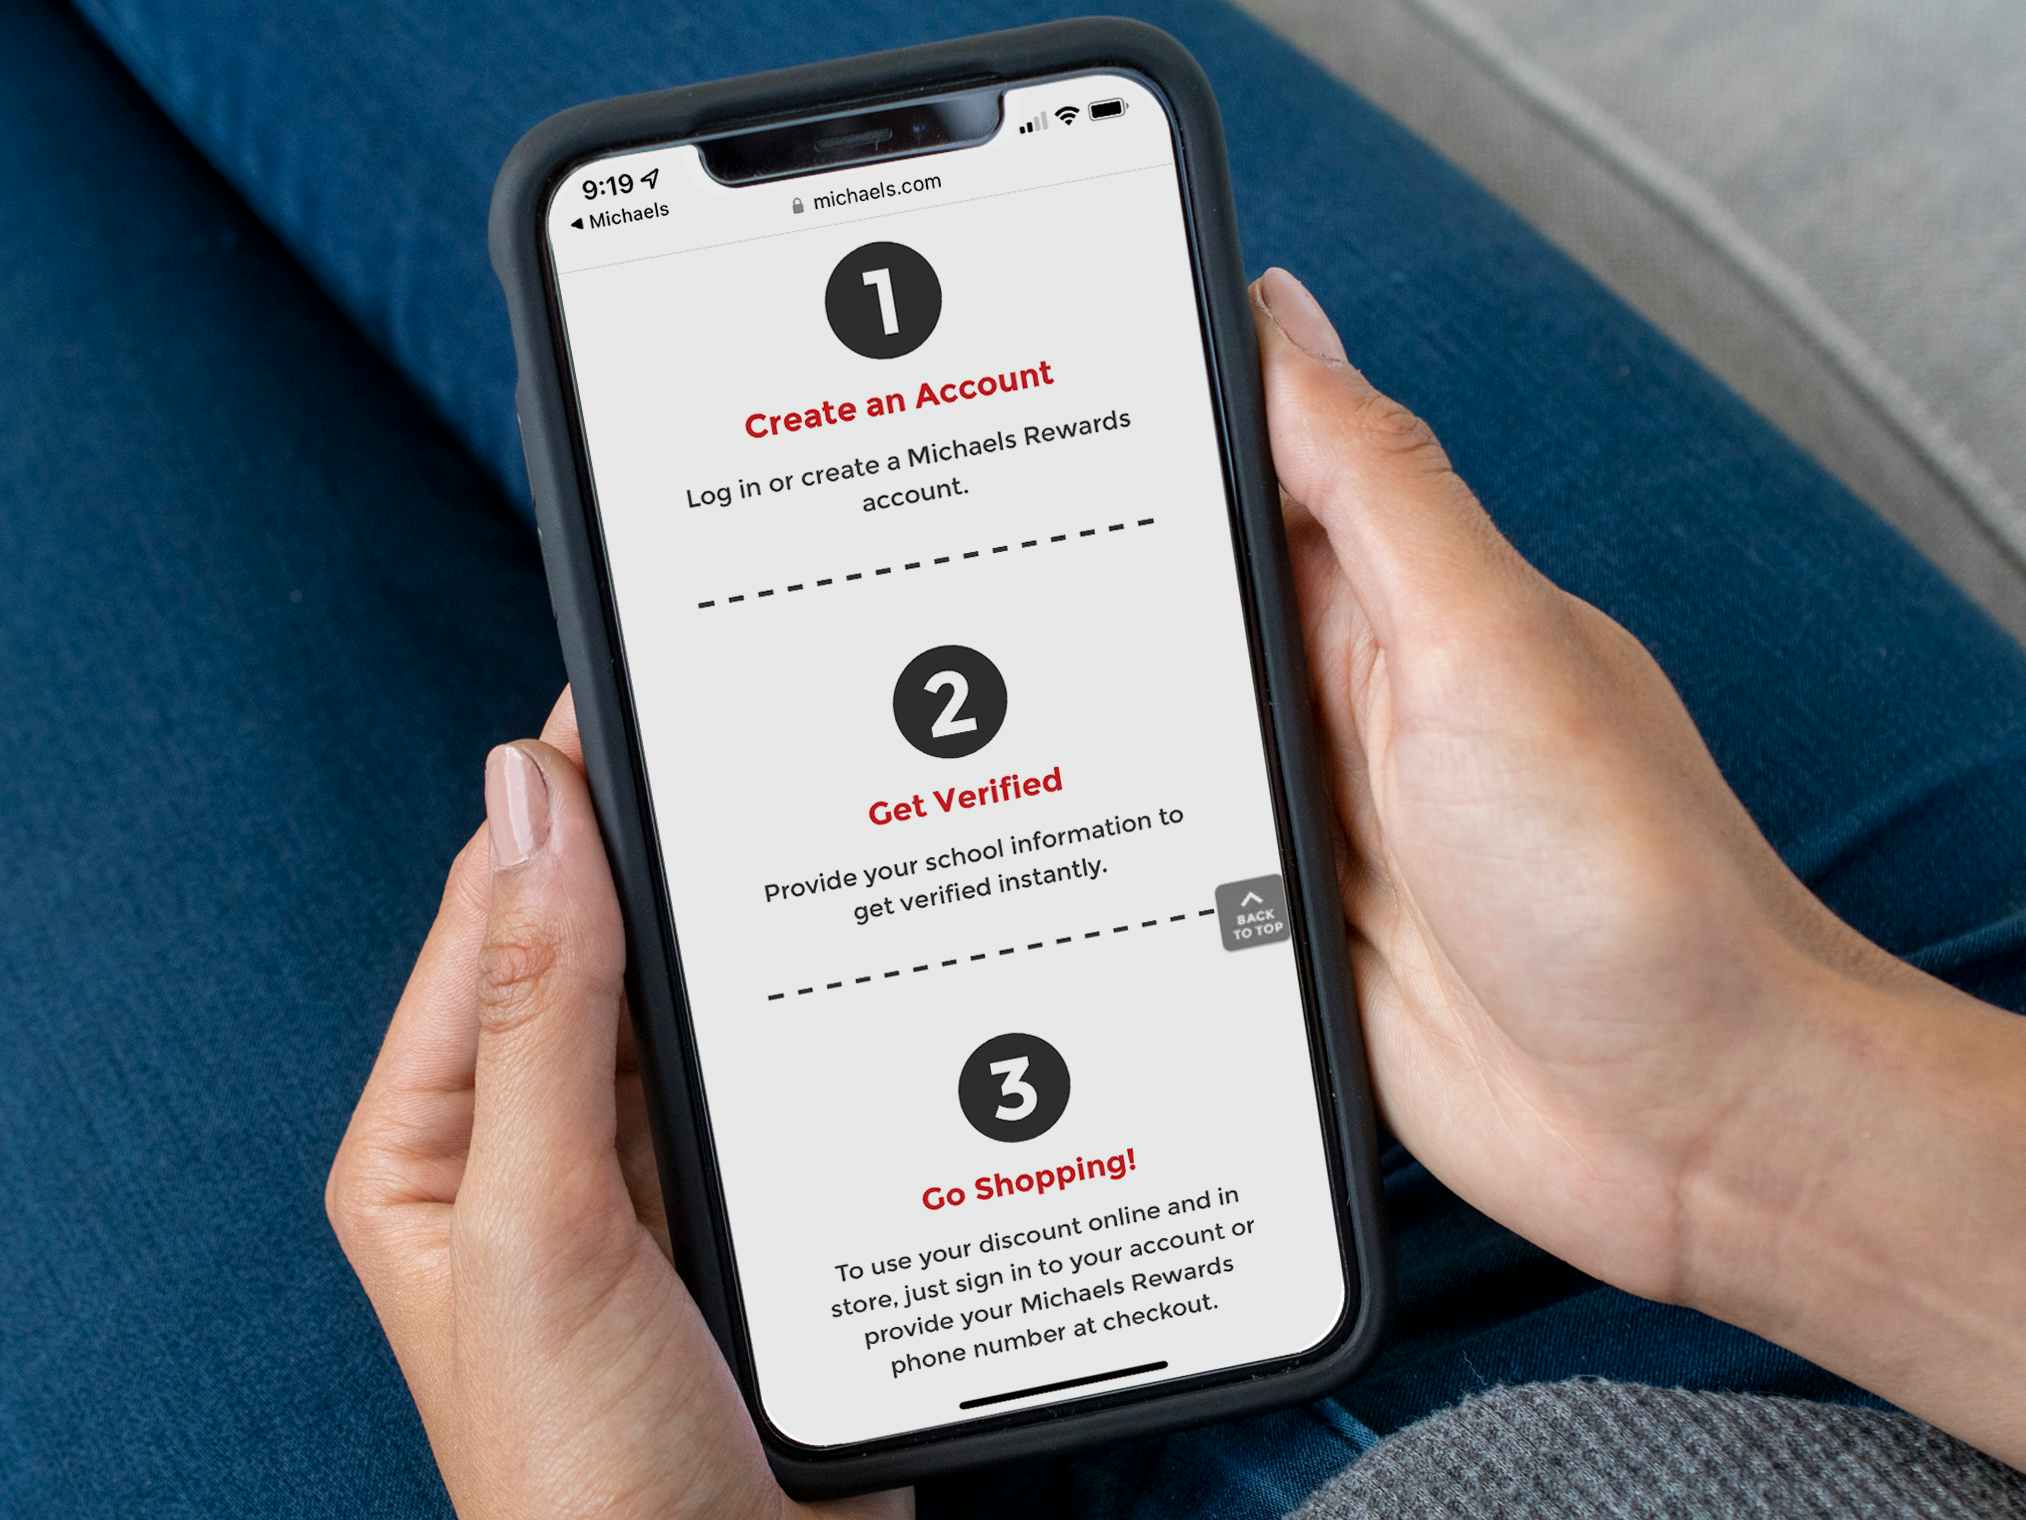 A person holding an iPhone displaying the instructions for Teacher Verification on the Michaels website.